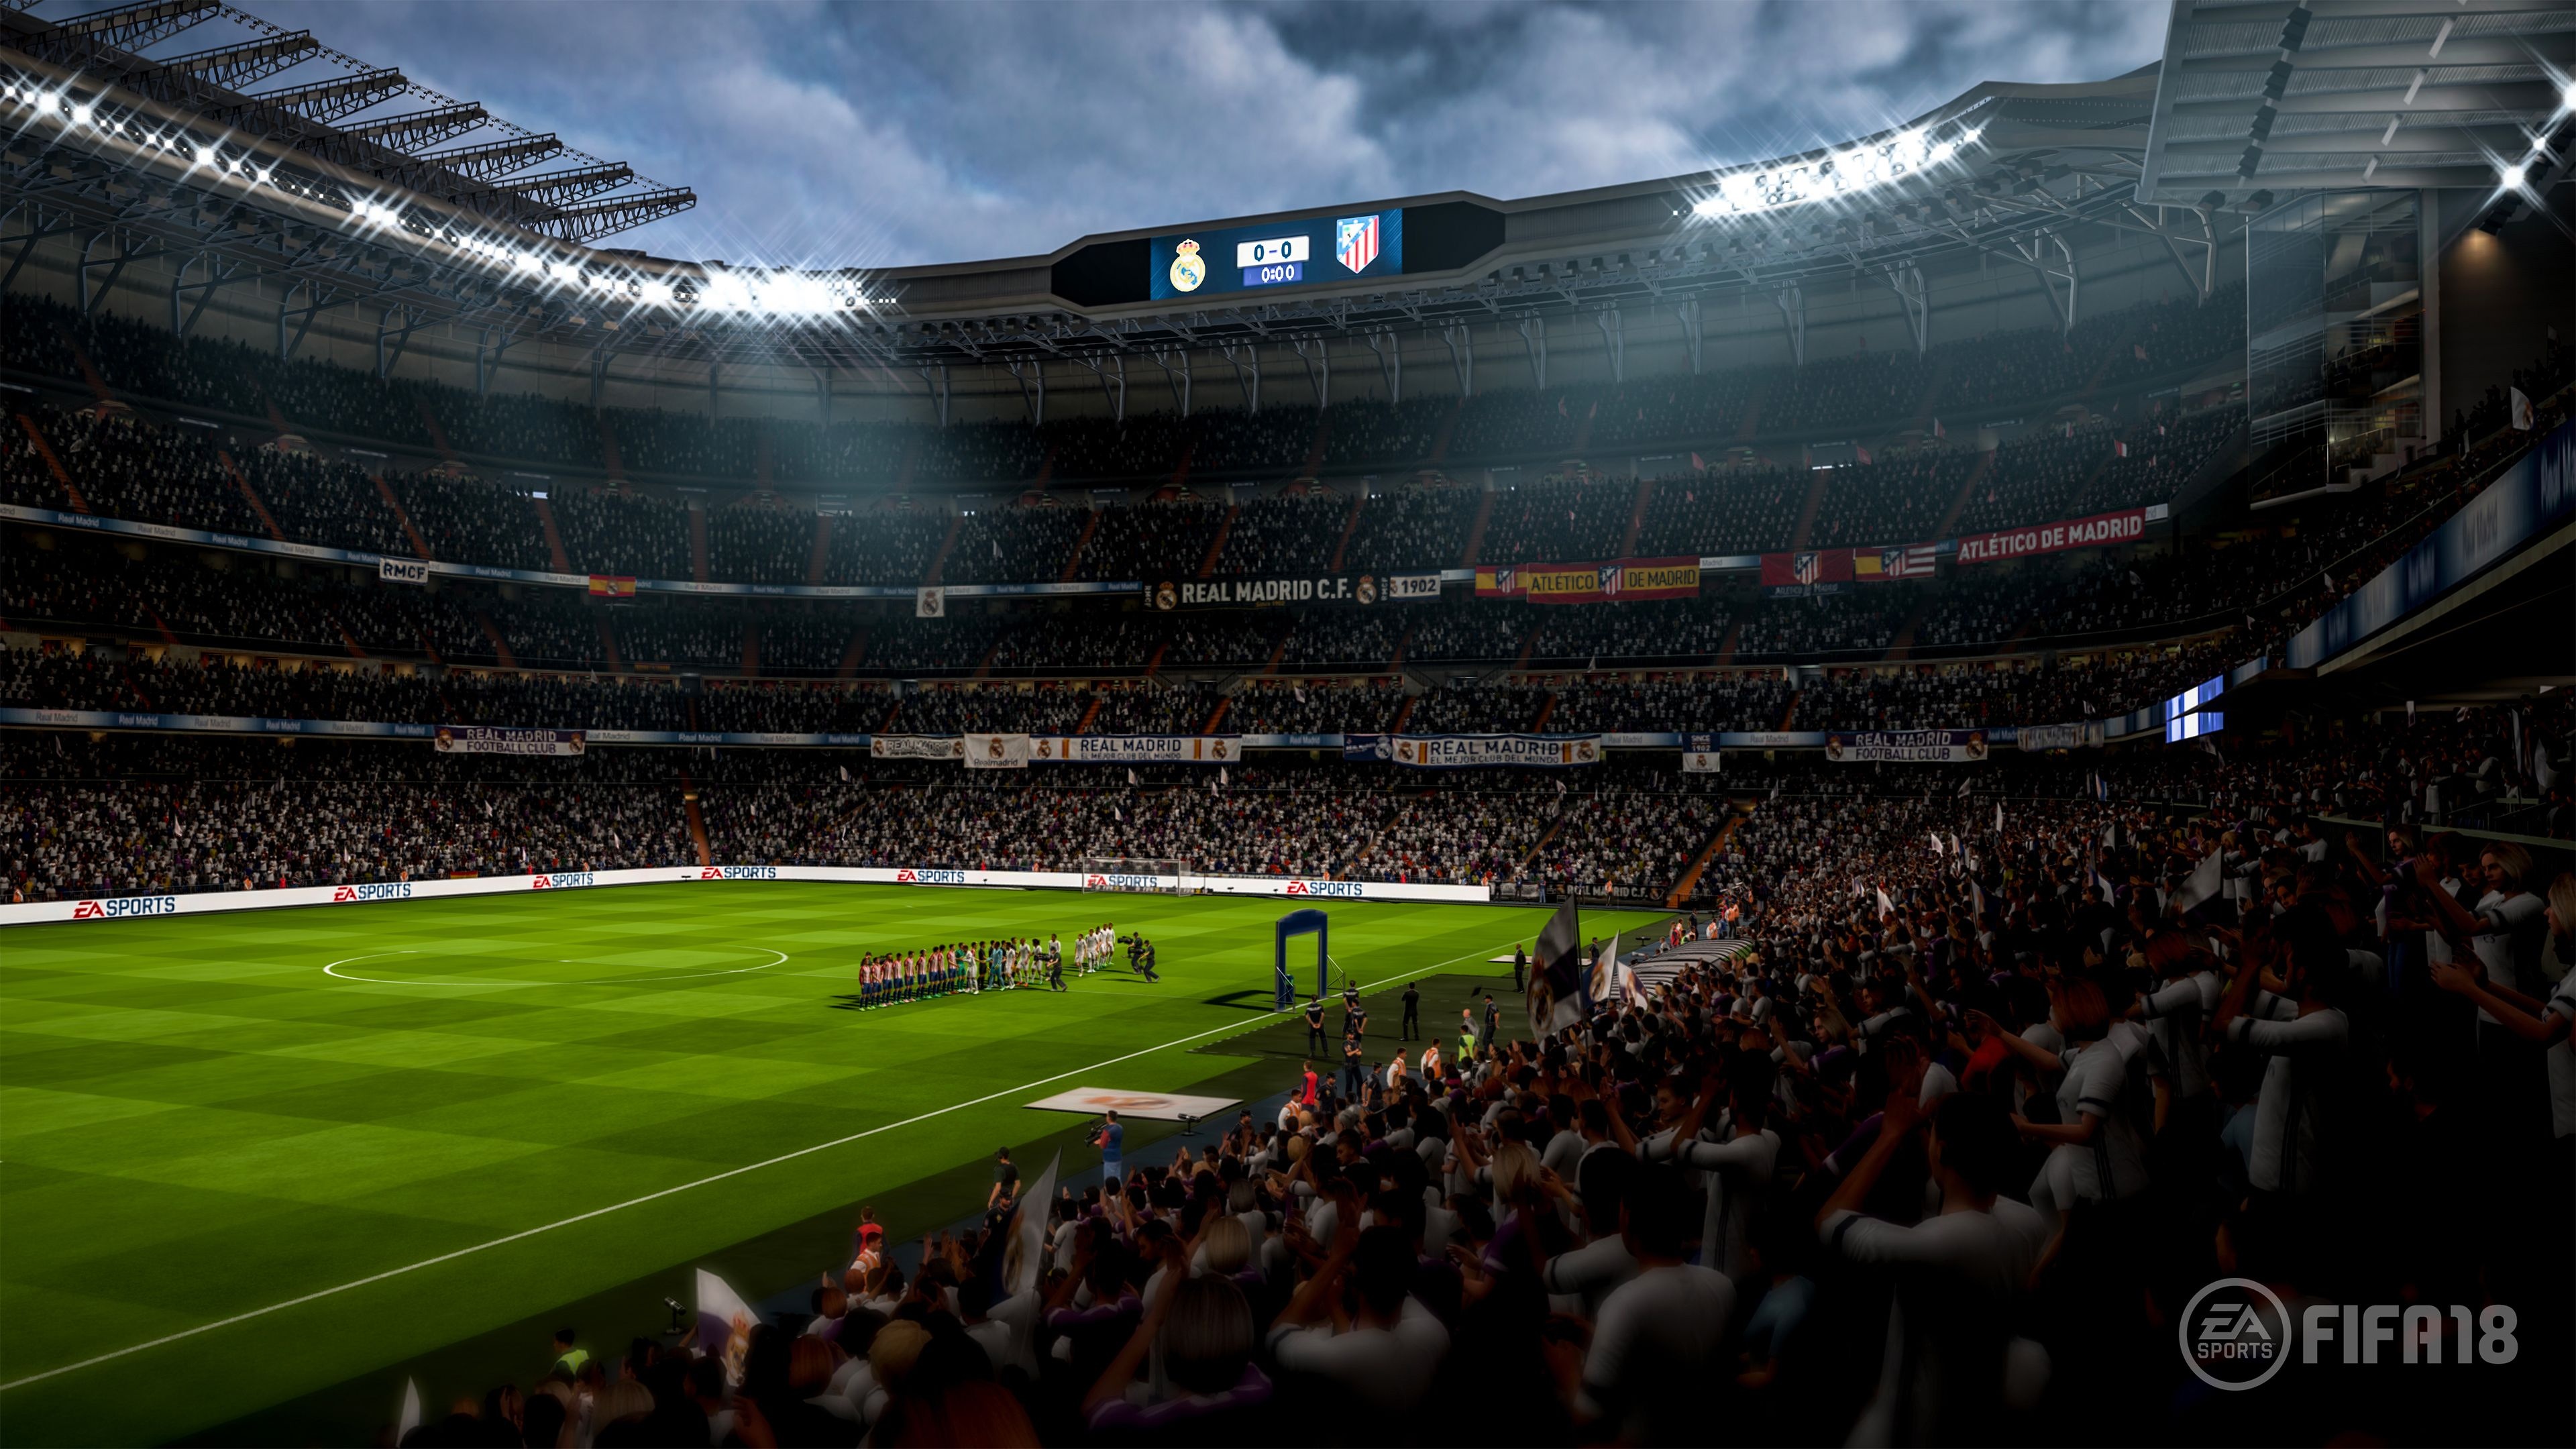 Sports game frenzy, FIFA wallpapers, Gaming passion, Football fever, 3840x2160 4K Desktop